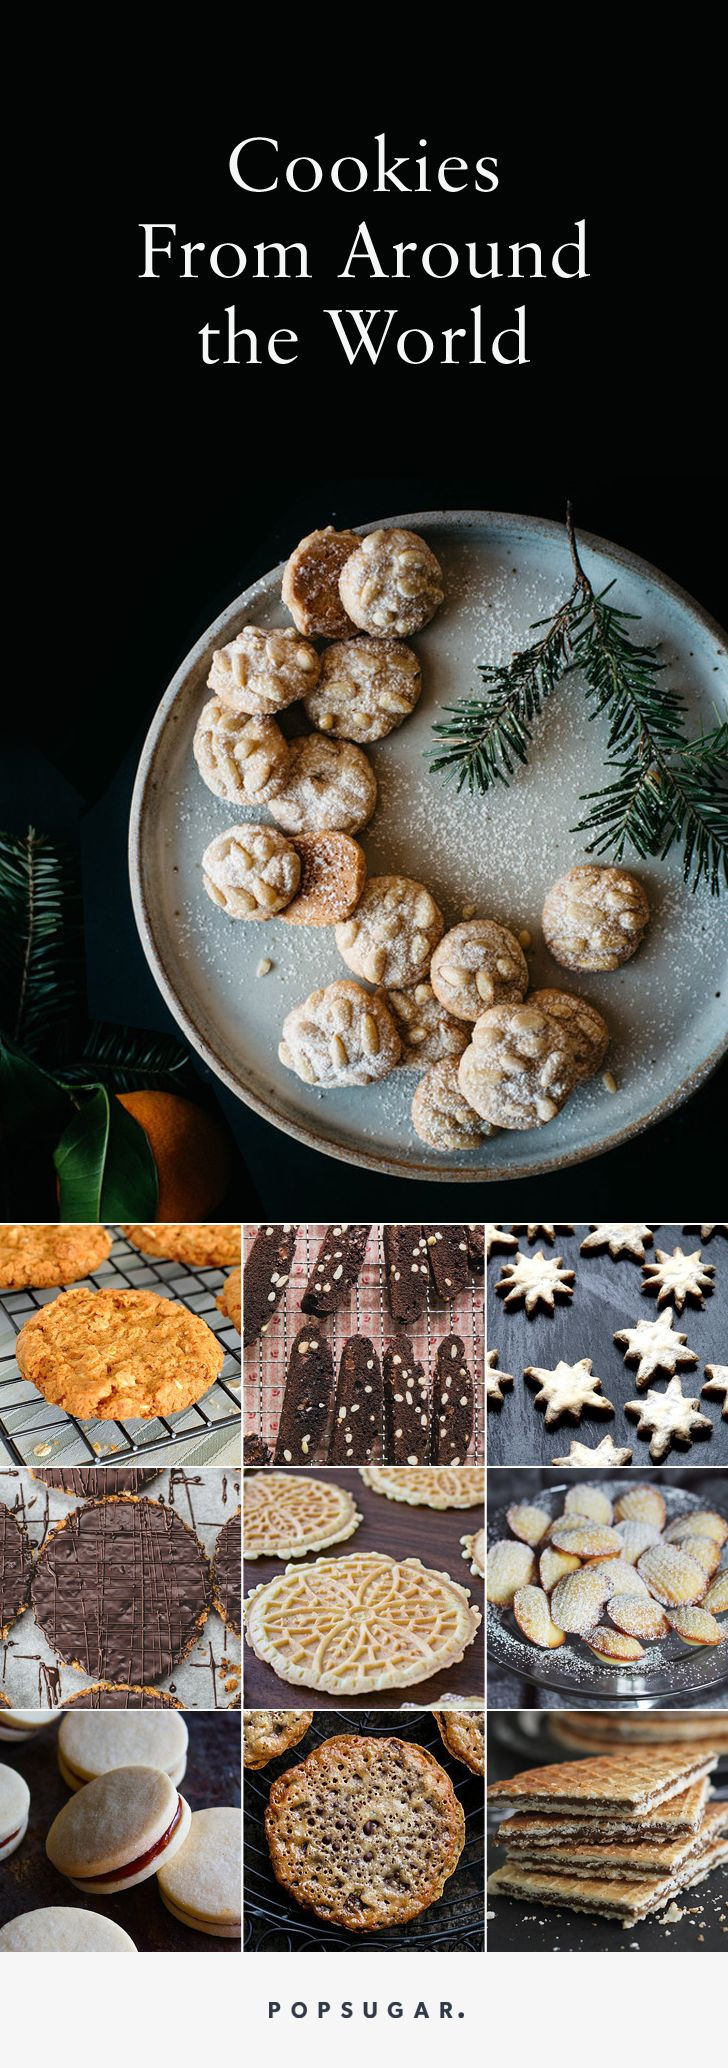 International Christmas Cookies
 25 Cookies From Around the World